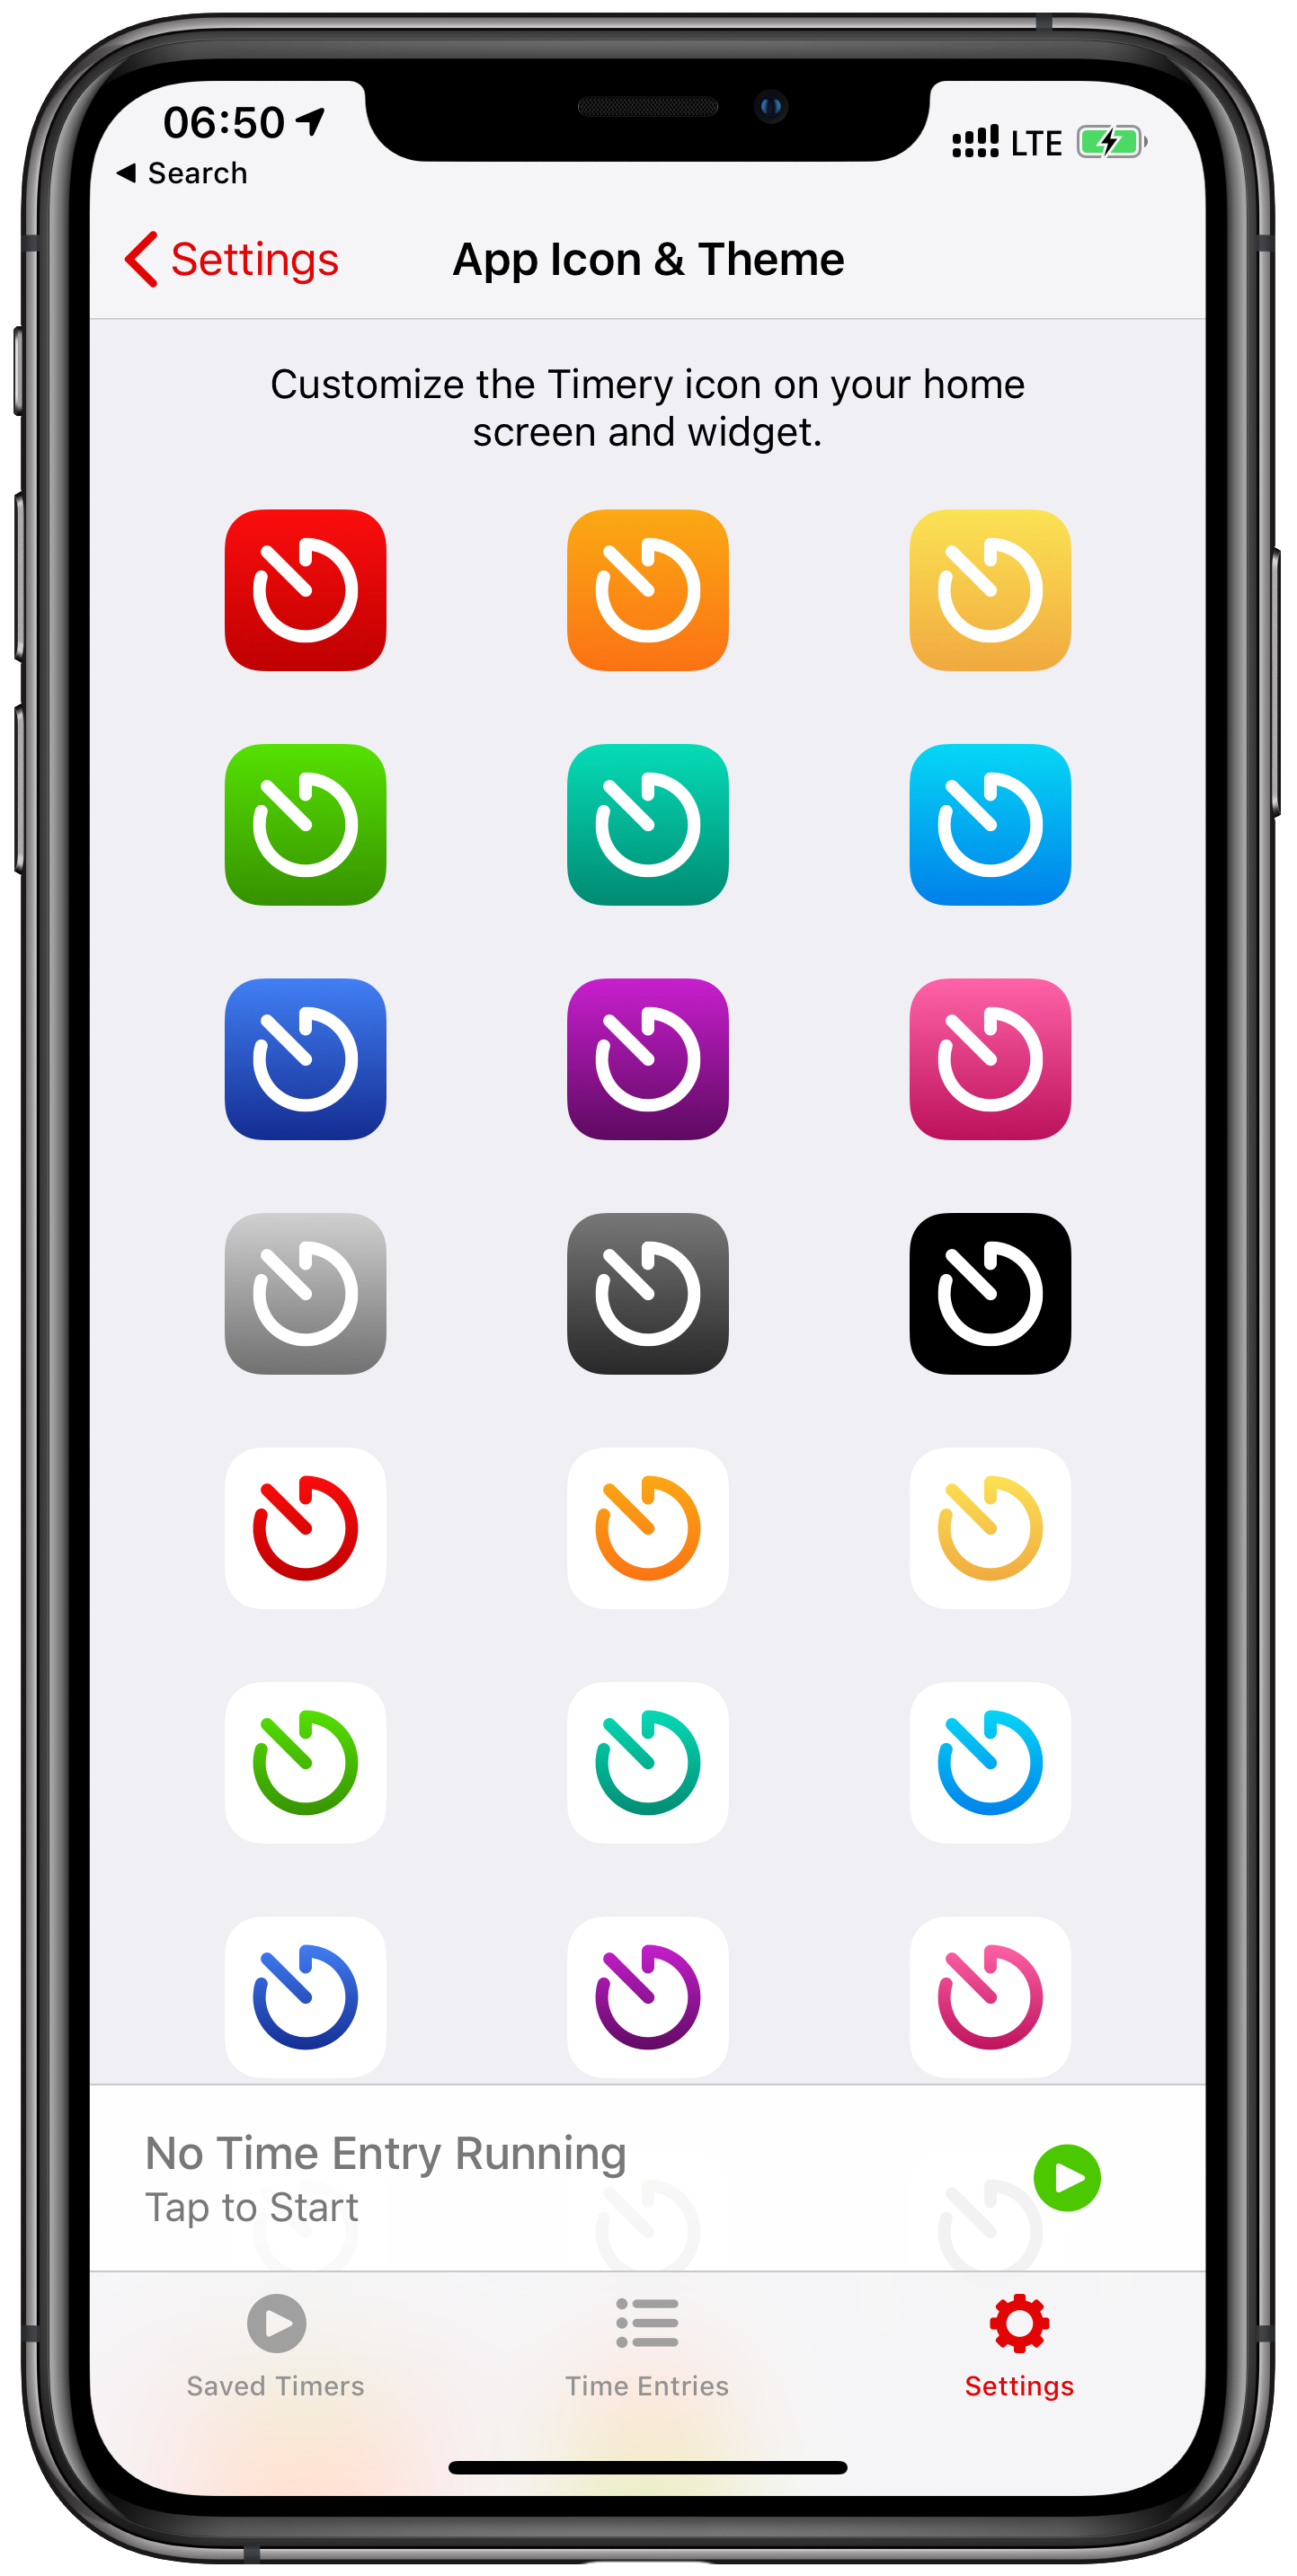 App icons and theme